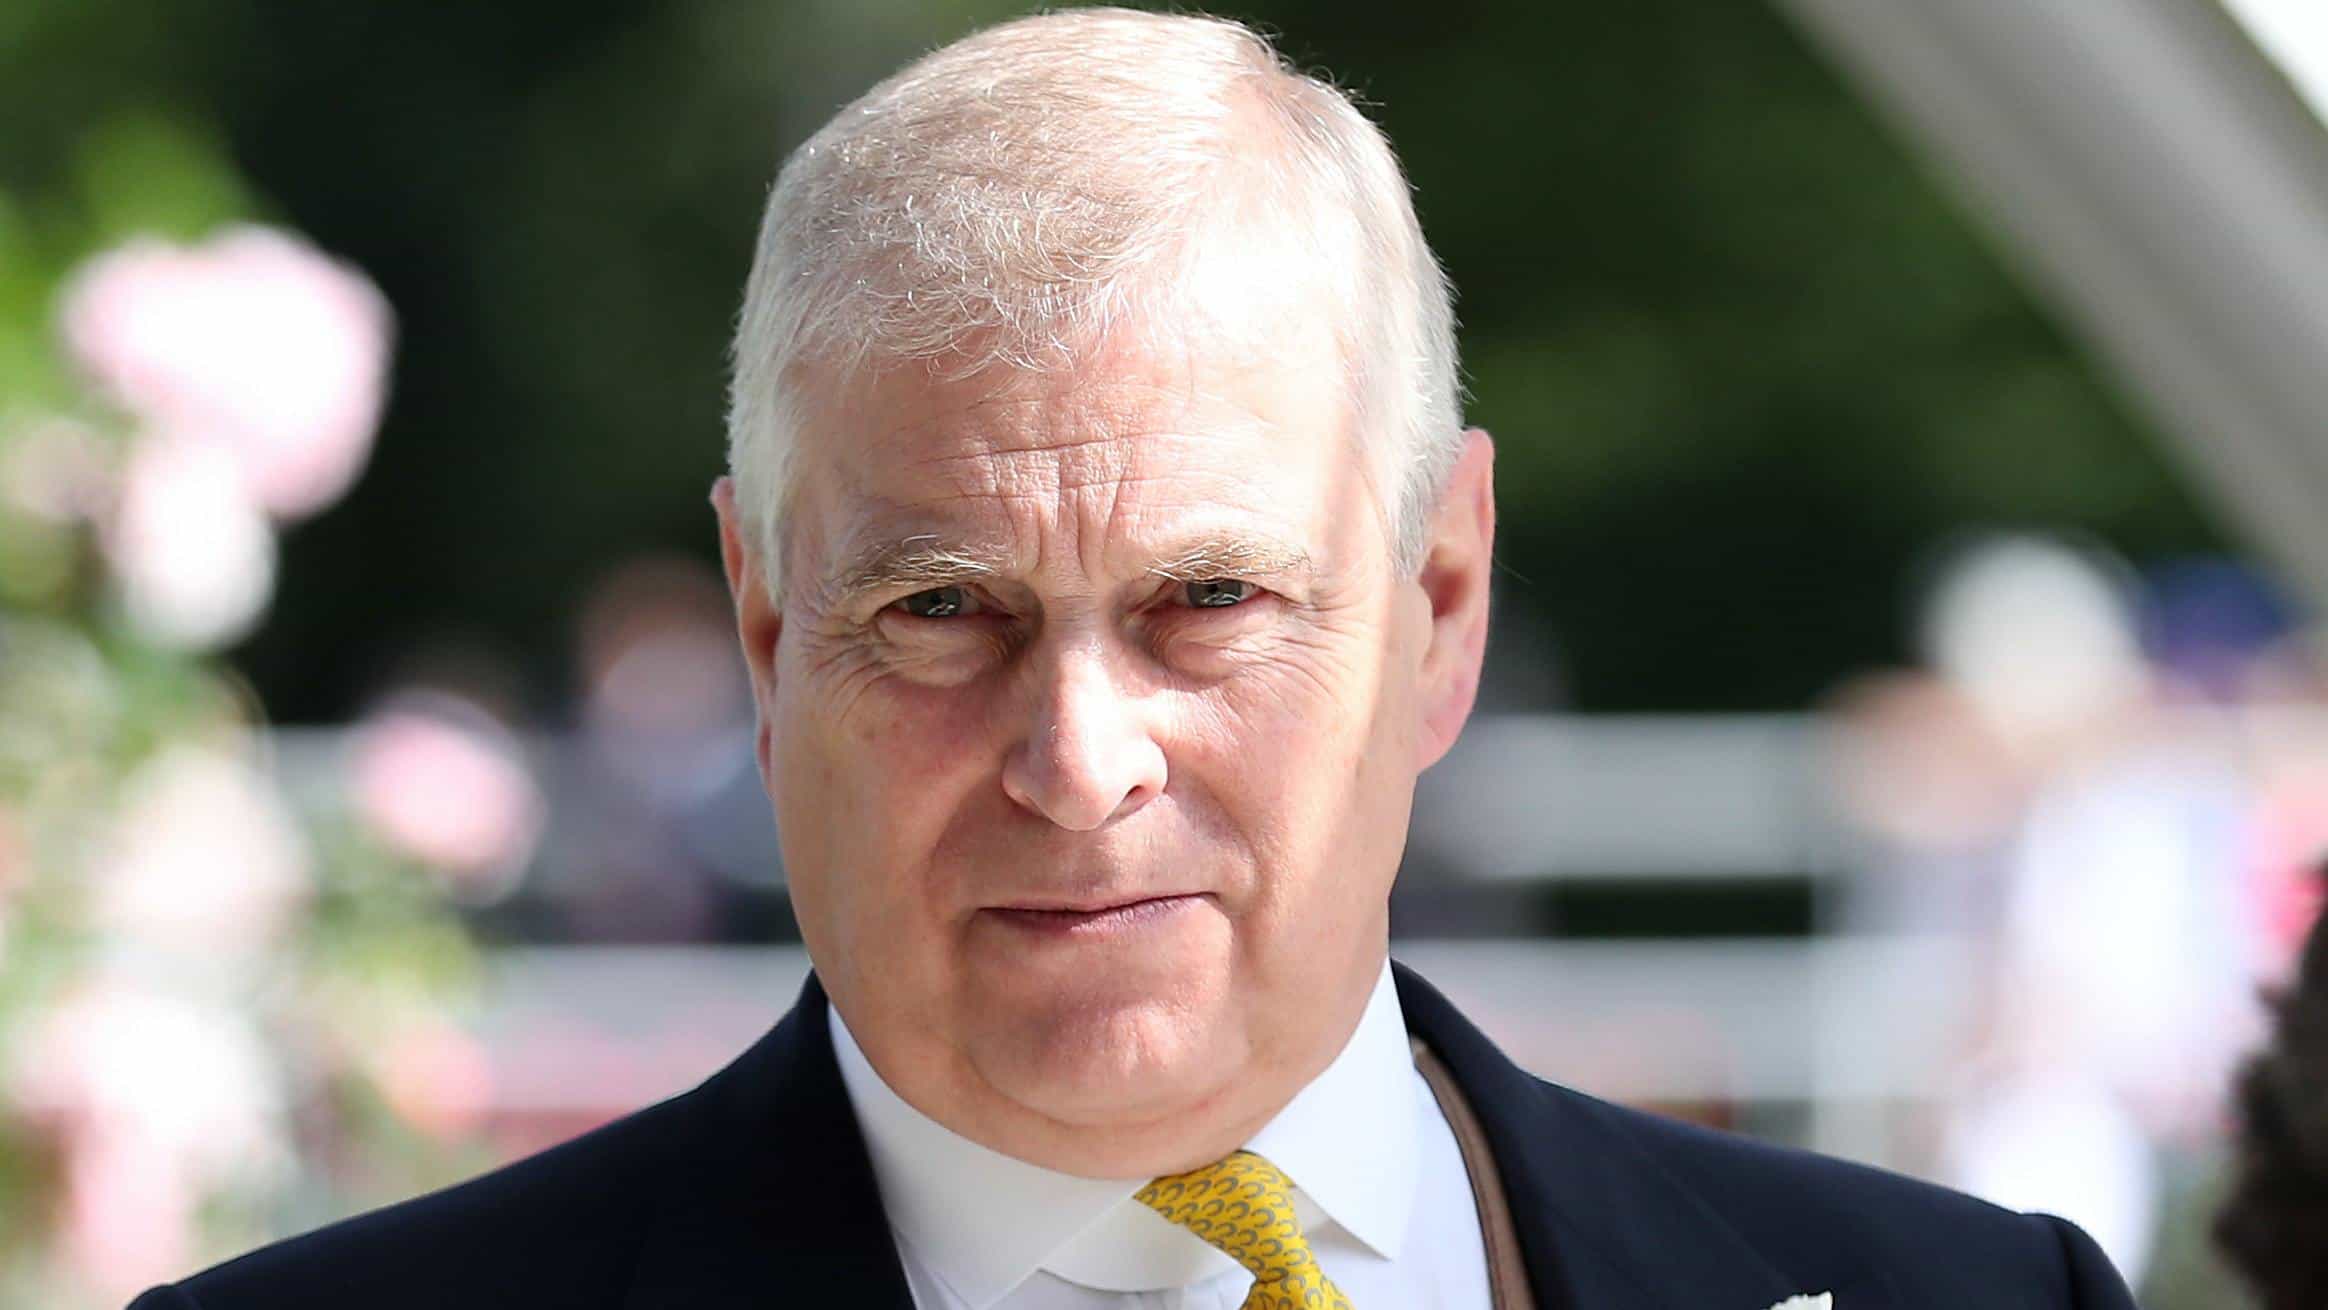 New Prince Andrew allegations unveiled in ‘Surviving Jeffrey Epstein’ documentary